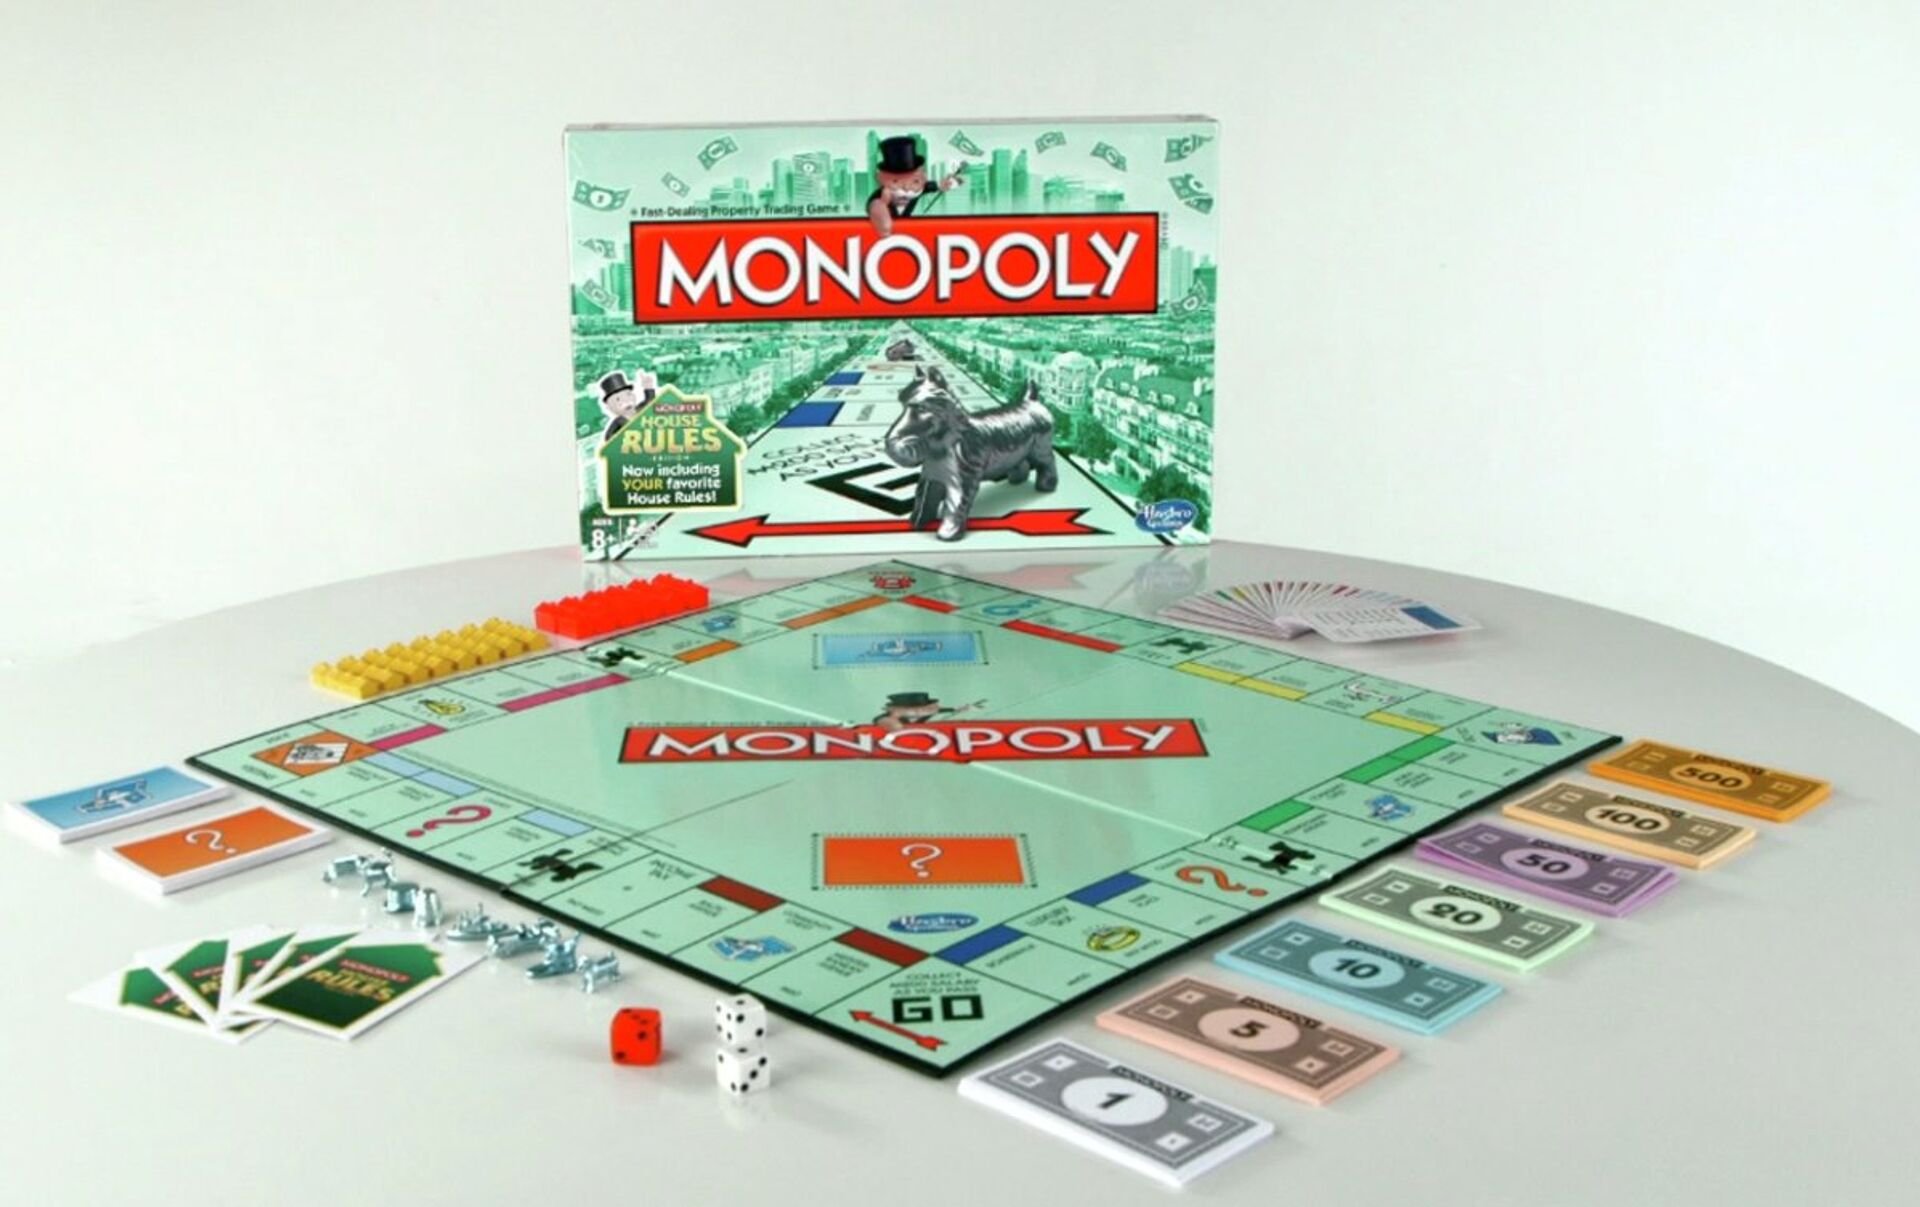 Https monopoly. Монополия. Монополия игра. Монополия настольная игра. Новая Монополия.